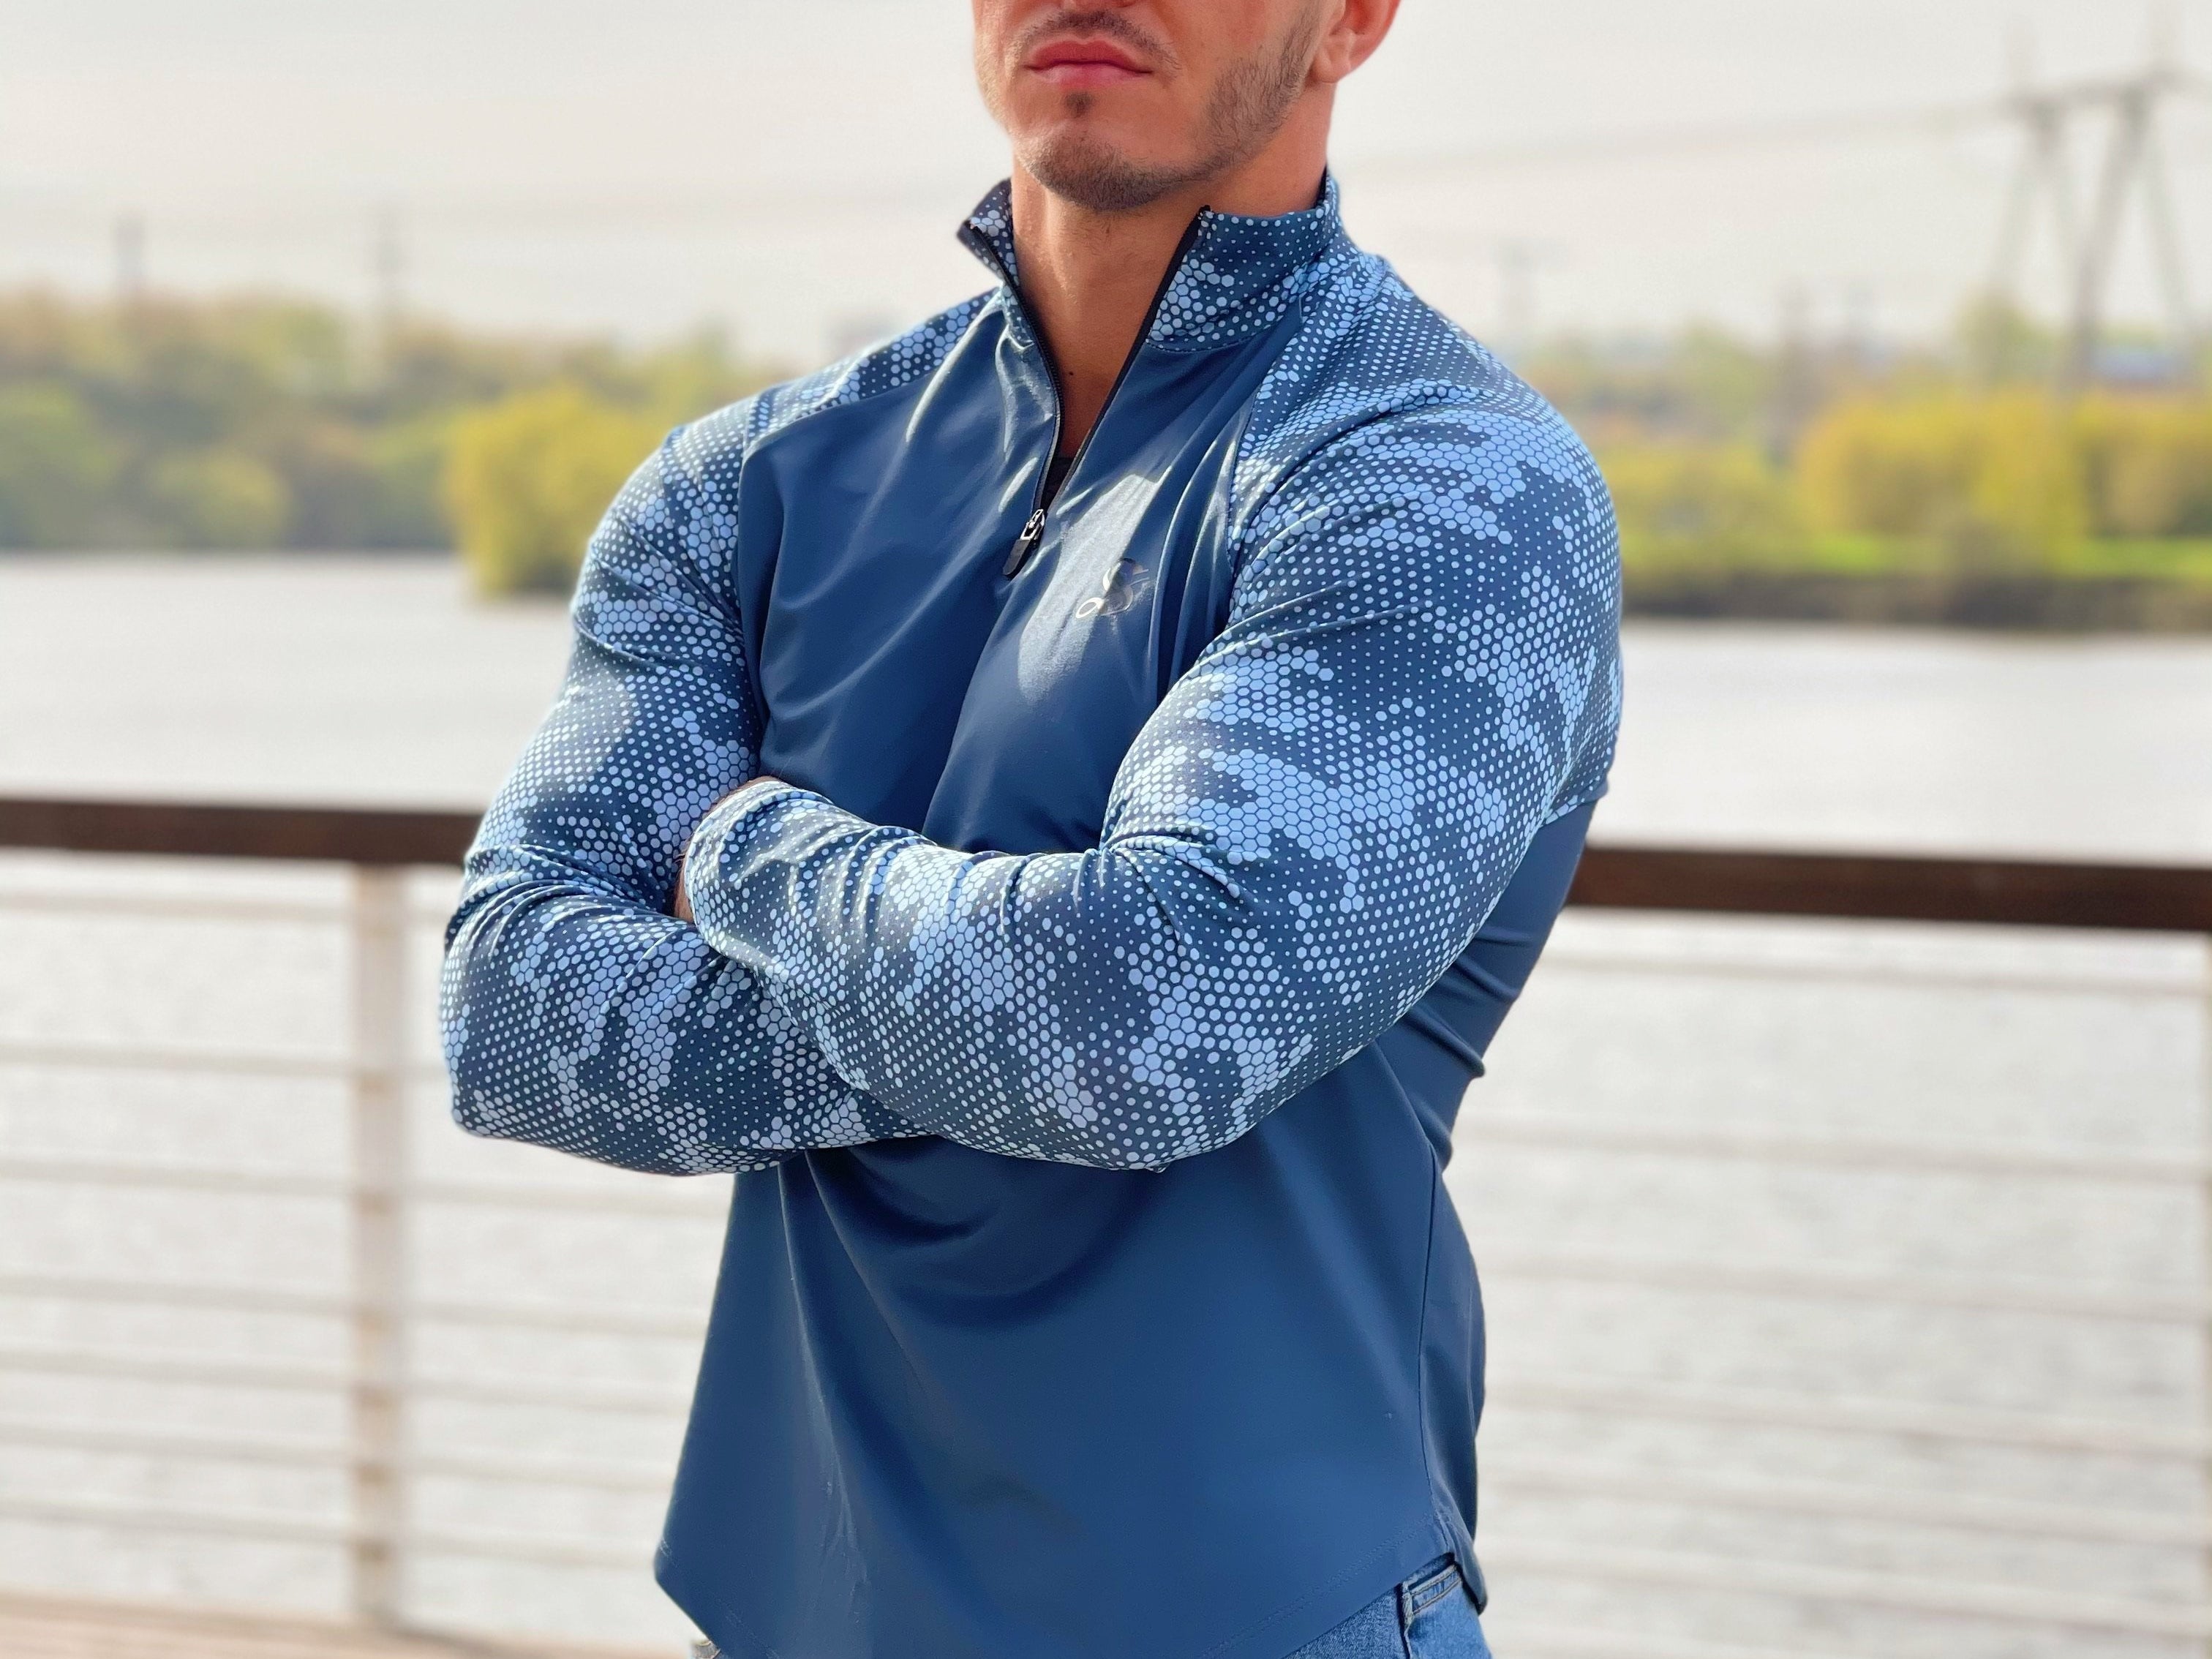 Rambo 2- Blue Long Sleeves Shirt for Men (PRE-ORDER DISPATCH DATE 1 JULY 2022) - Sarman Fashion - Wholesale Clothing Fashion Brand for Men from Canada